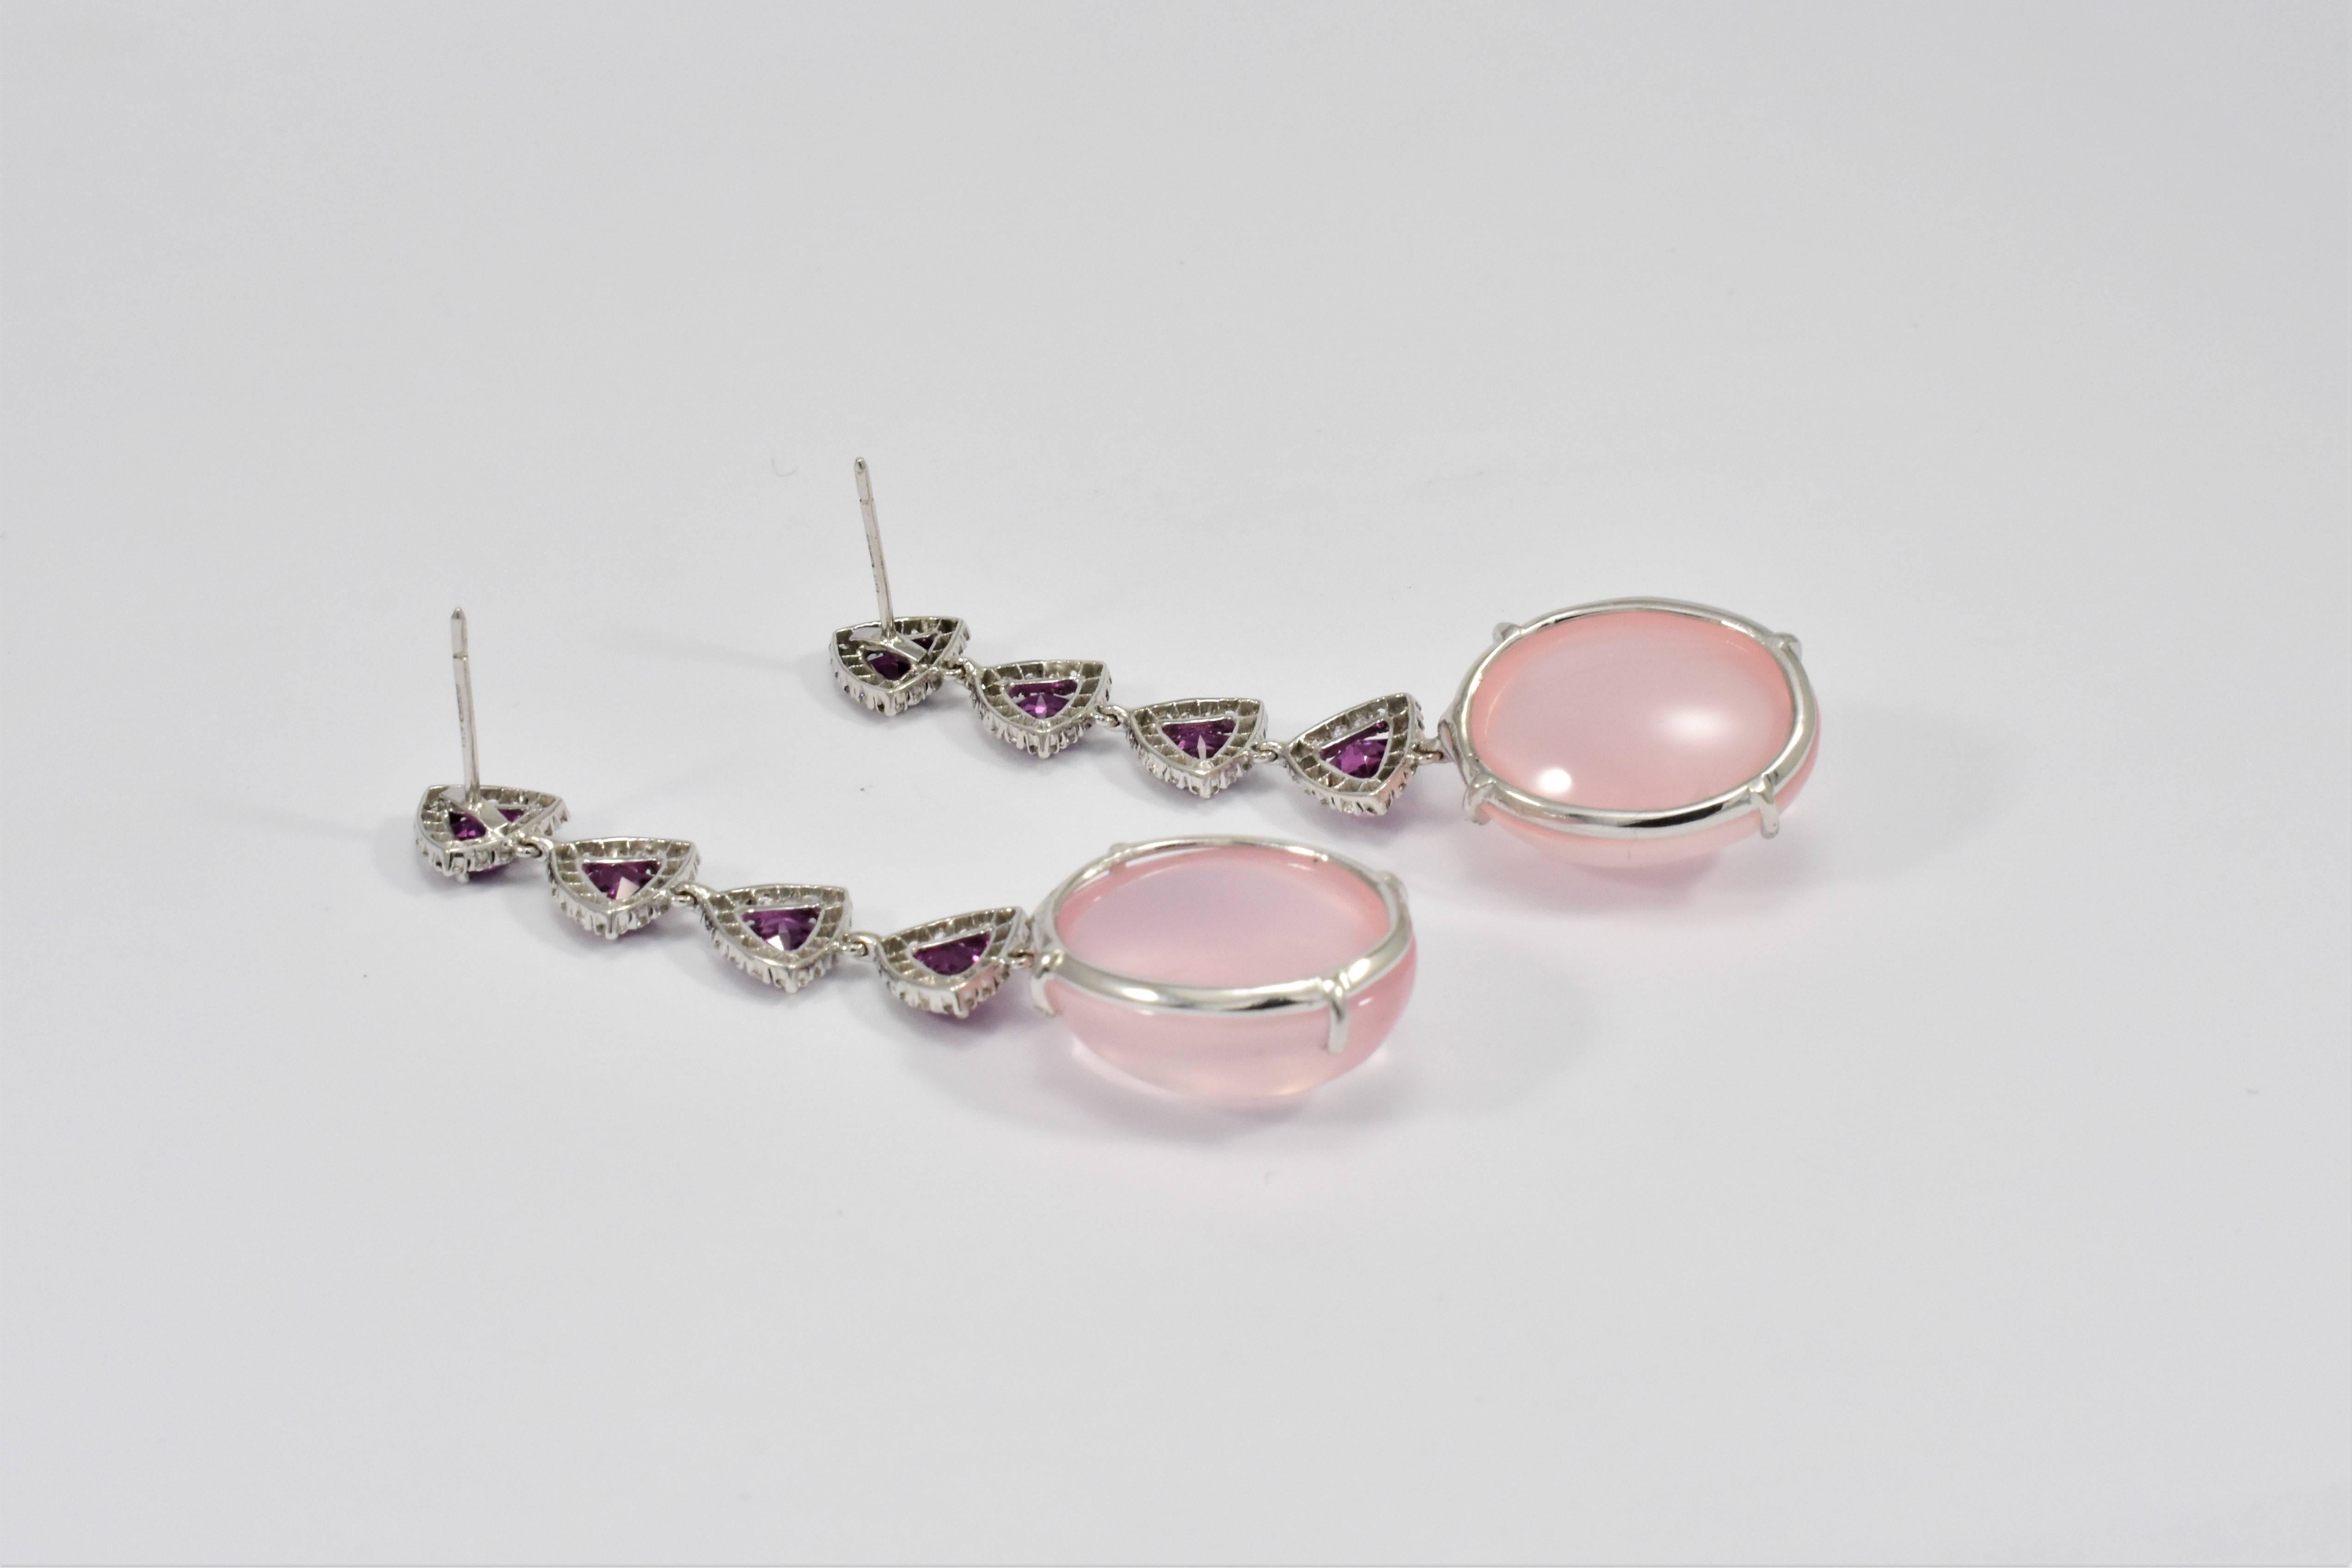 A lovely and eye catching pair of swinging ear pendants in 18ct white gold and pink mauve tones. The line of earring drops is formed of four bright purple garnet trilliant cut faceted stones each framed by a border of diamonds and linked to each